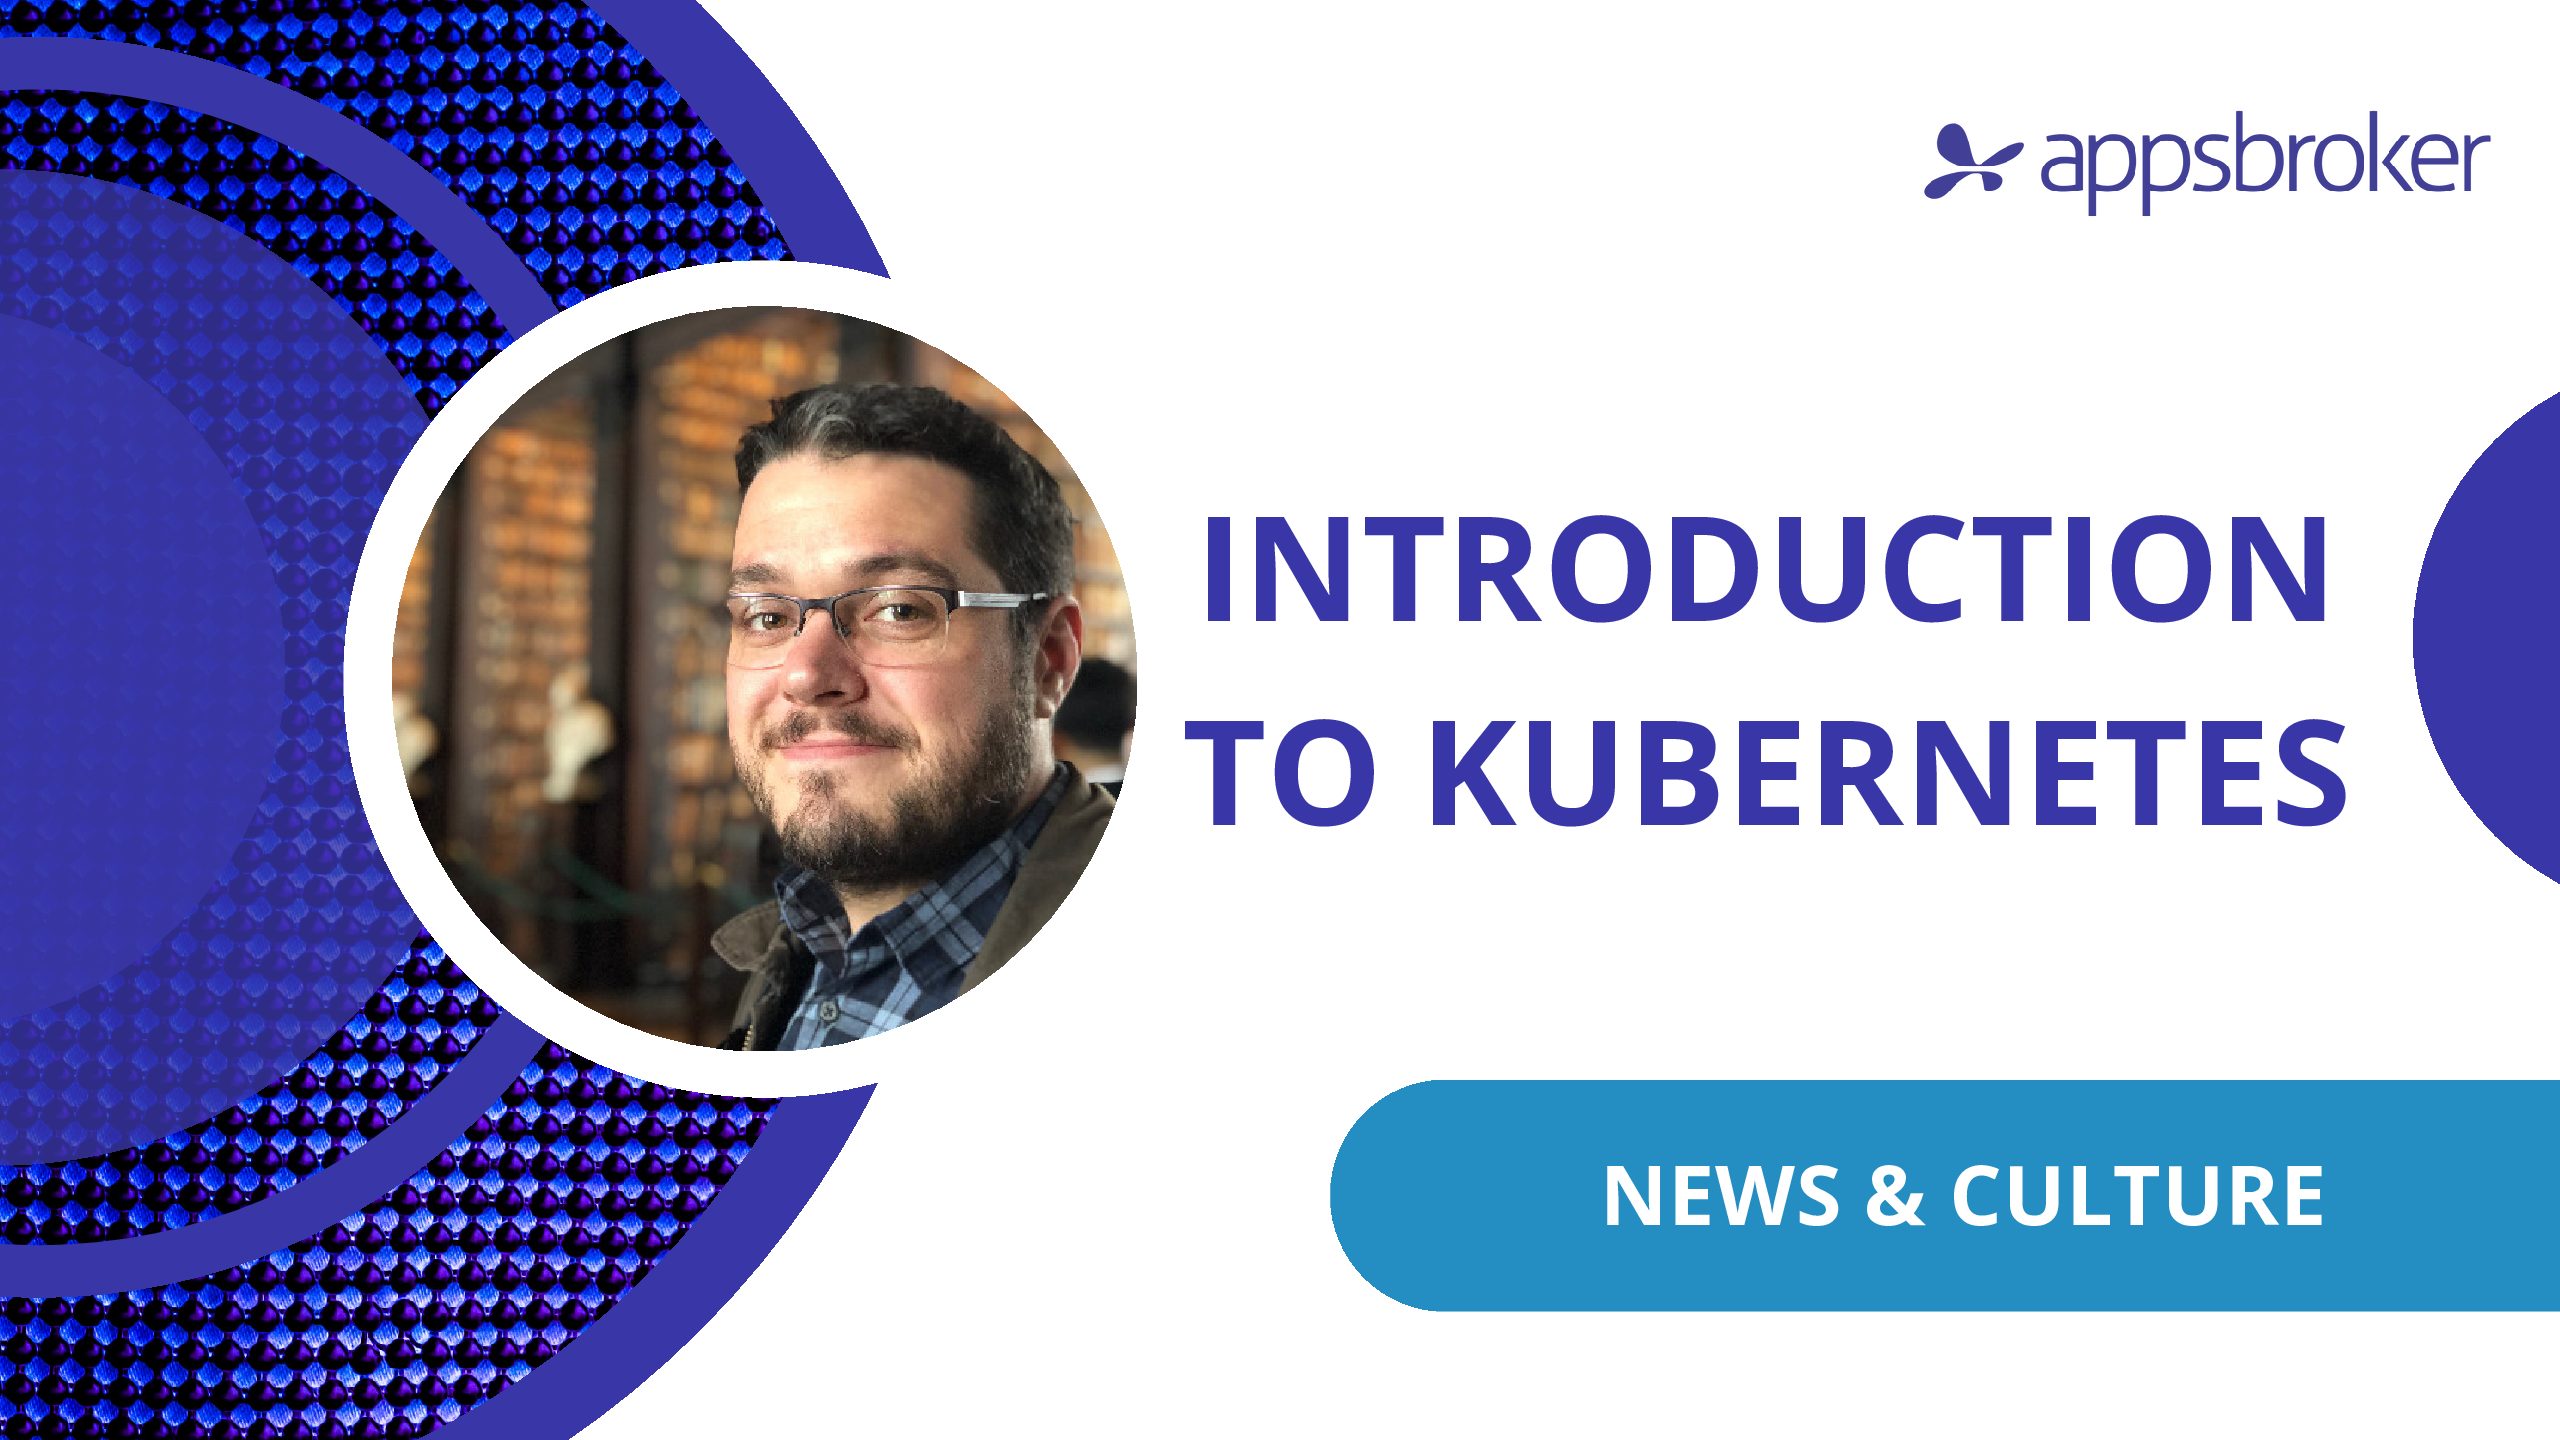 An Introduction to Kubernetes